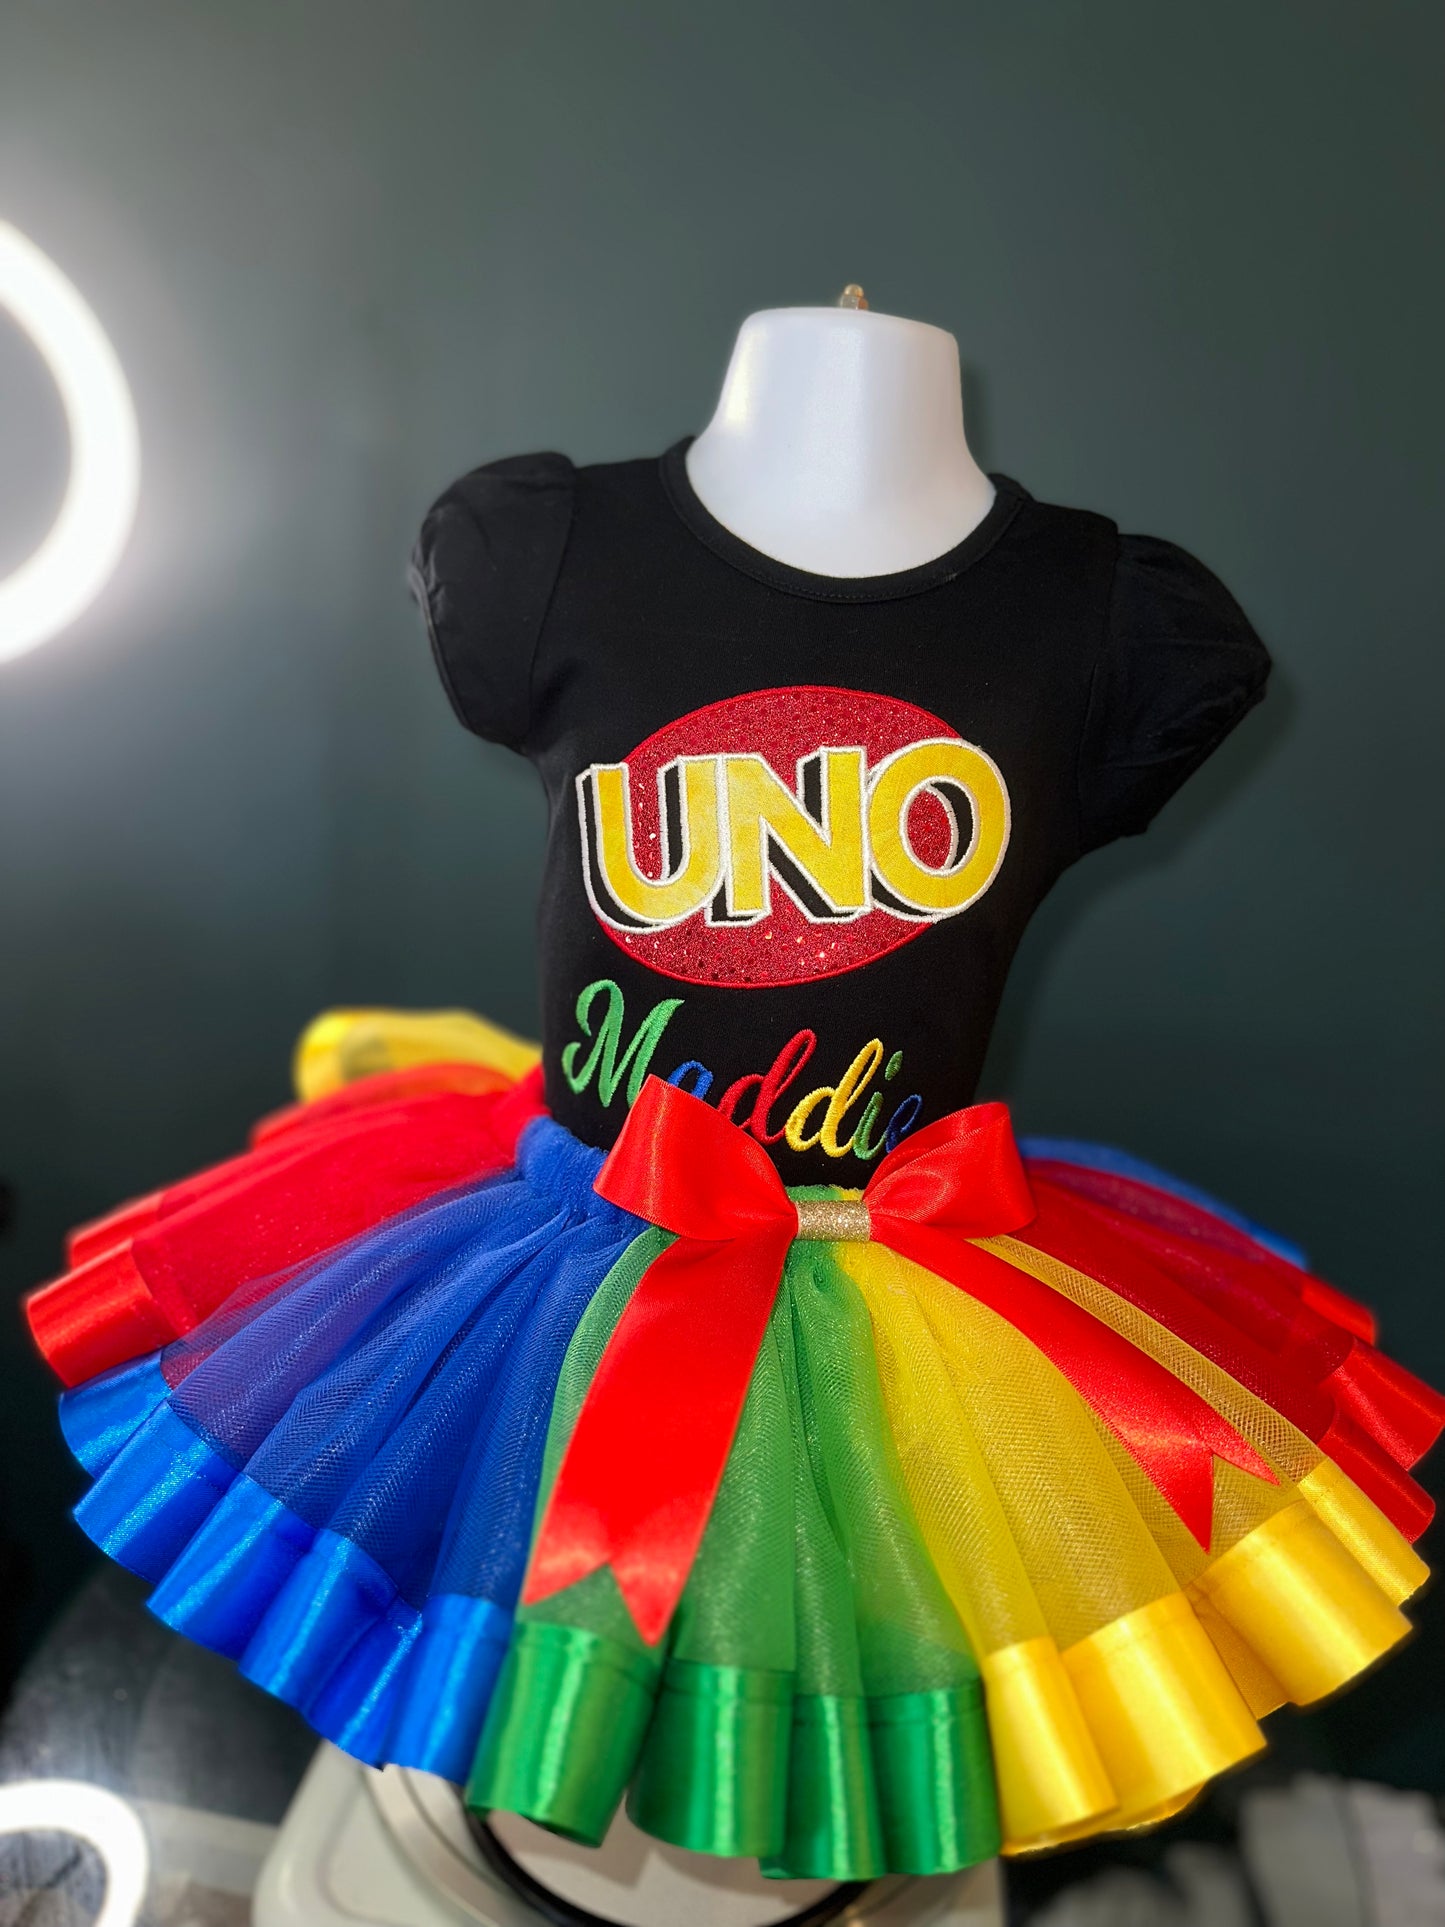 uno theme birthday outfit. personalized embroidery. black puff sleeve shirt and matching multi colored tulle skirt with waist bow